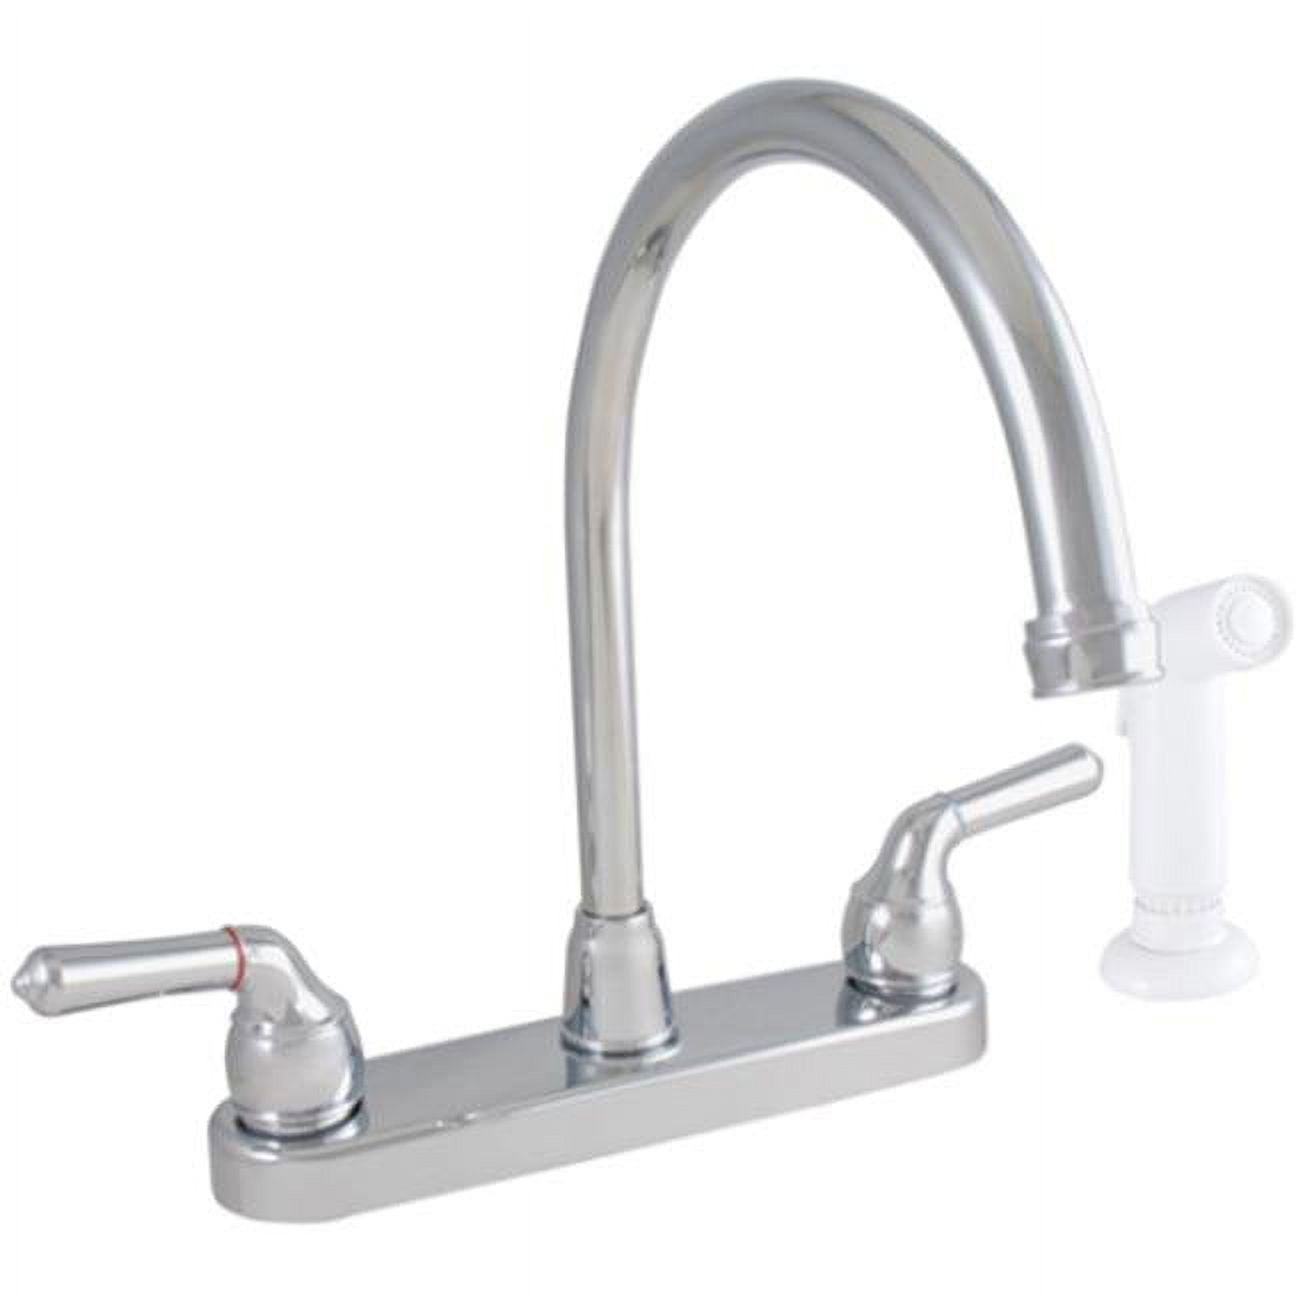 012 36425cp 2-handle Kitchen Faucet With Spray, Chrome